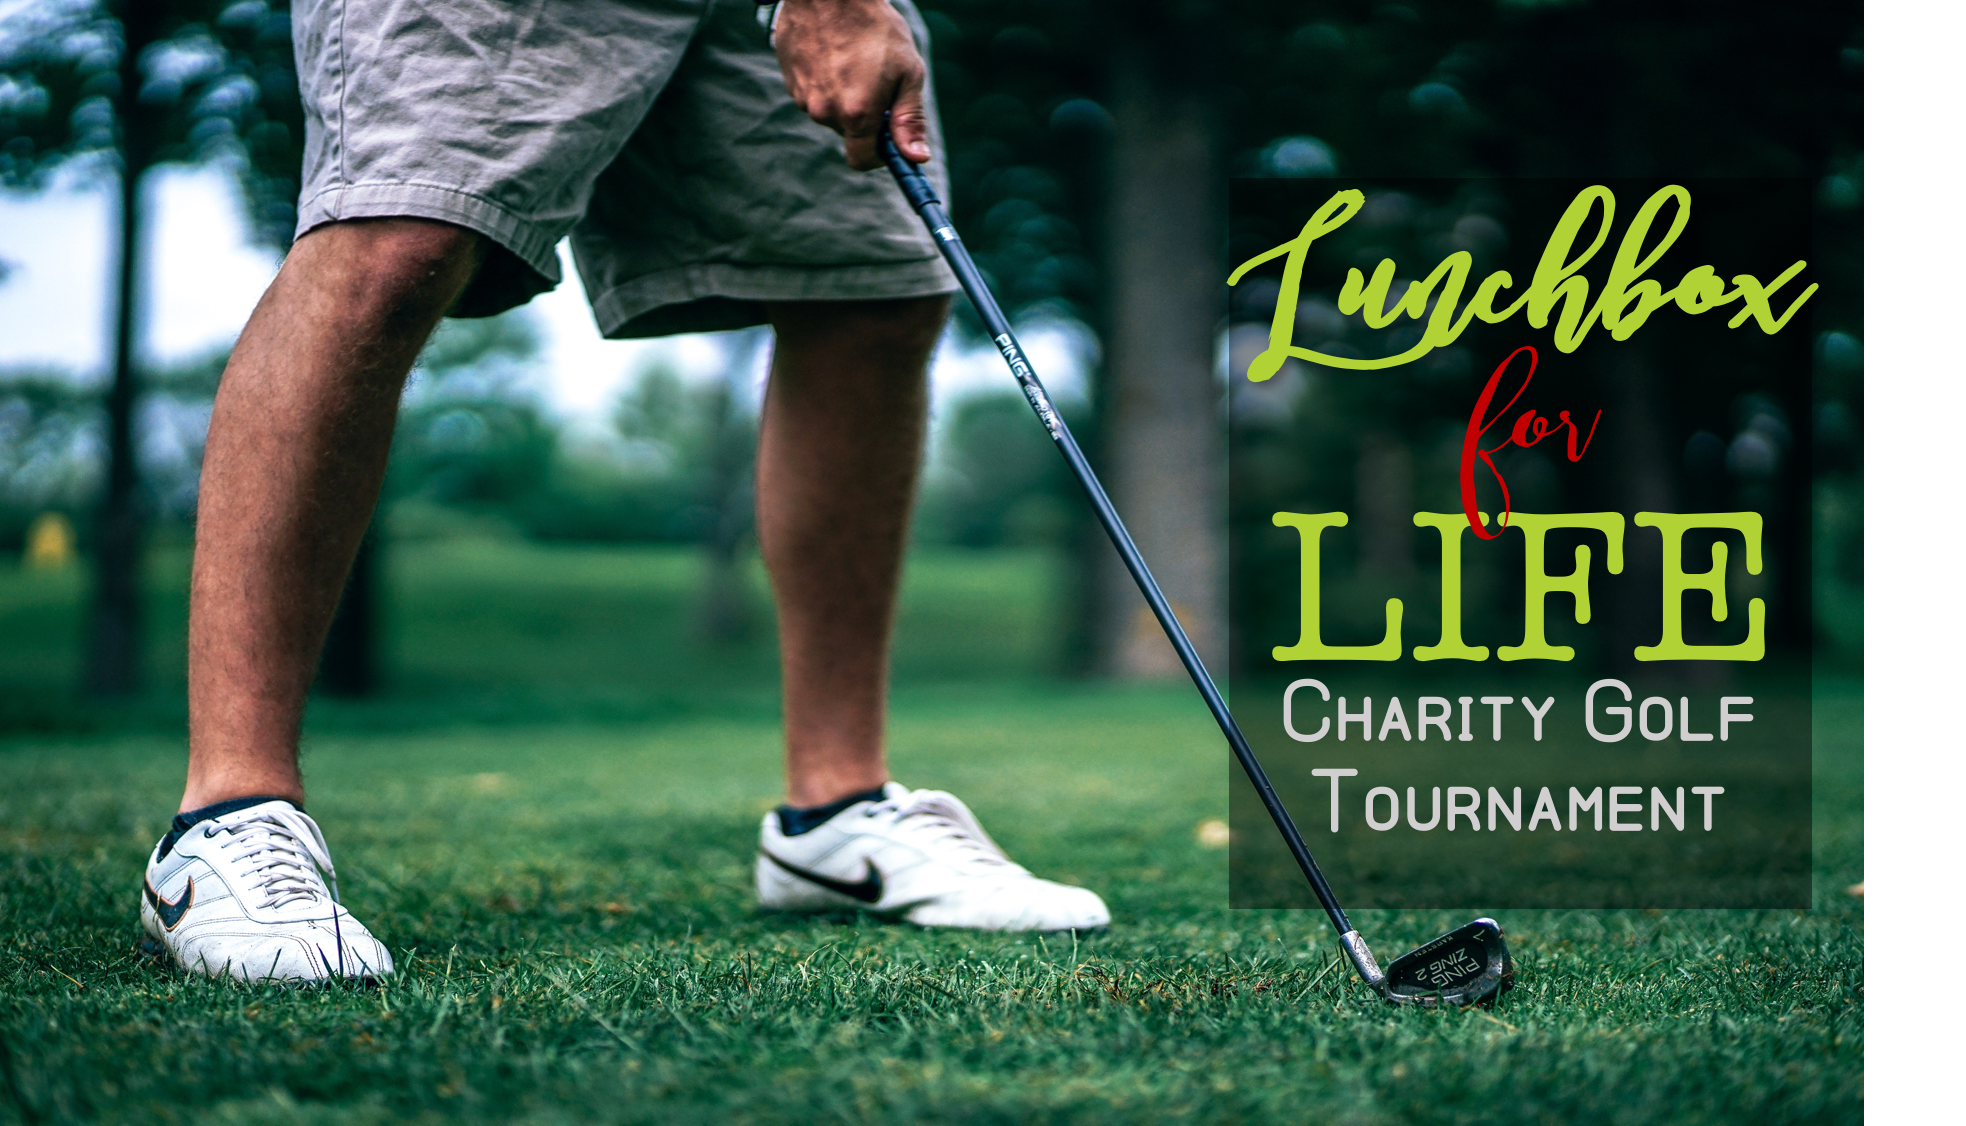 2019 Lunchbox for Life Charity Golf Tournament